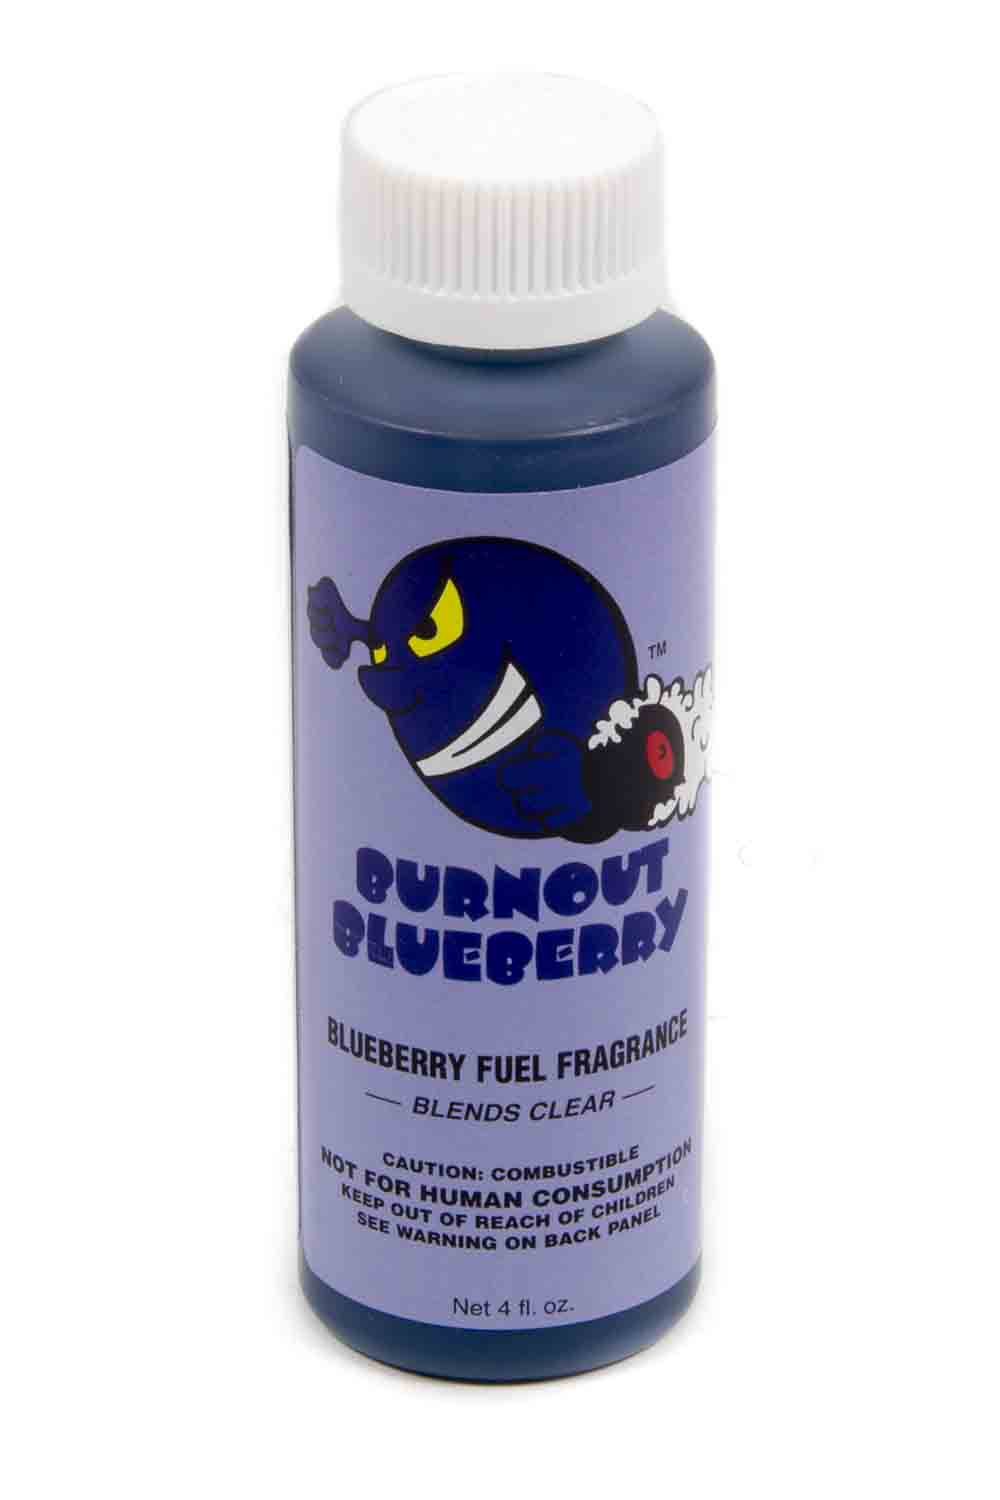 BLUEBERRY Scented Fuel Fragrance 4oz